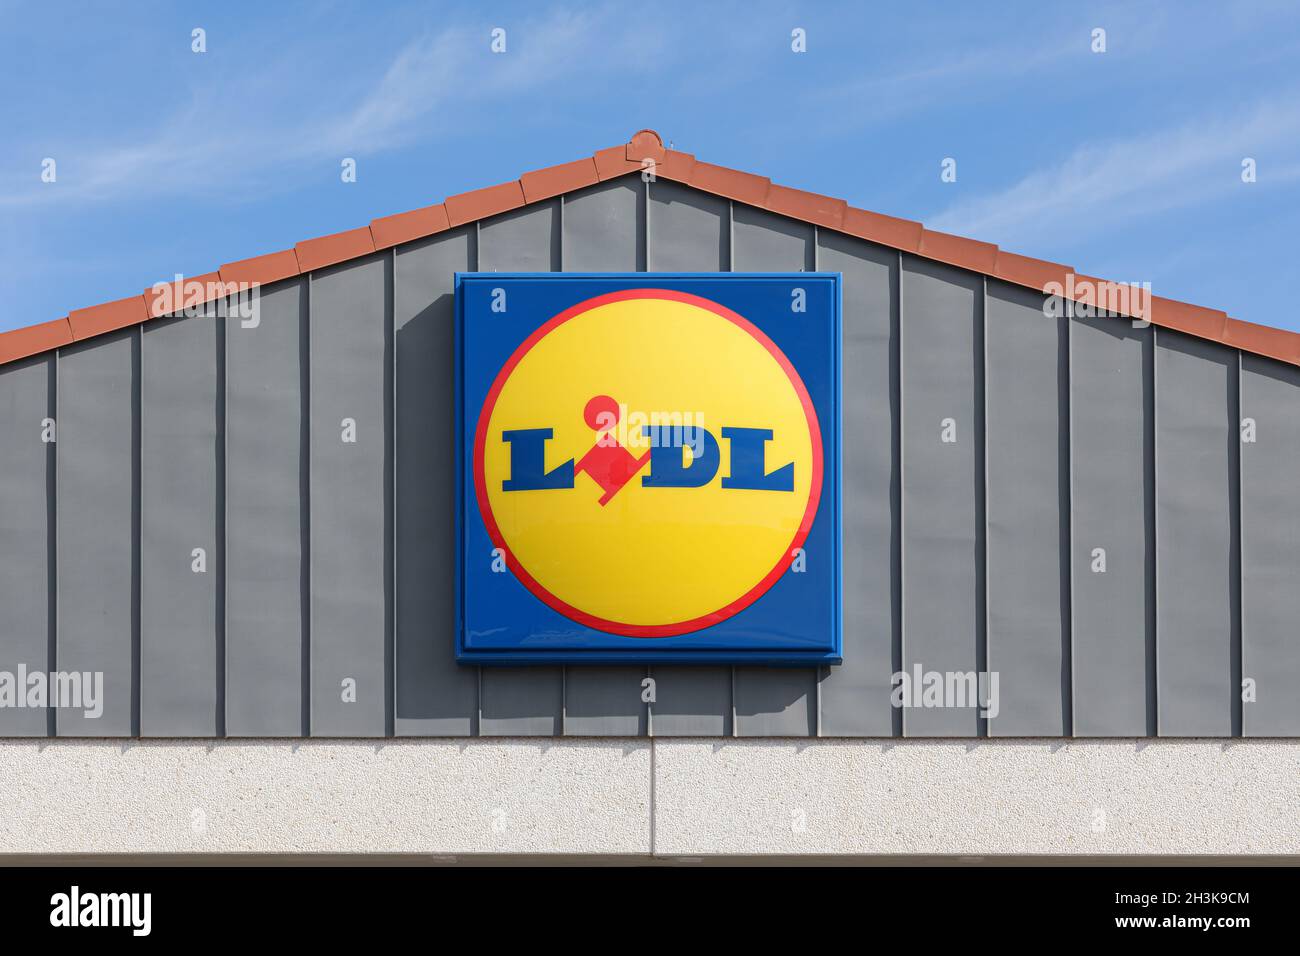 LA POBLA DE VALLBONA, SPAIN - OCTOBER 27, 2021: Lidl is a German international discount retailer chain that operates in Europe and the United States Stock Photo